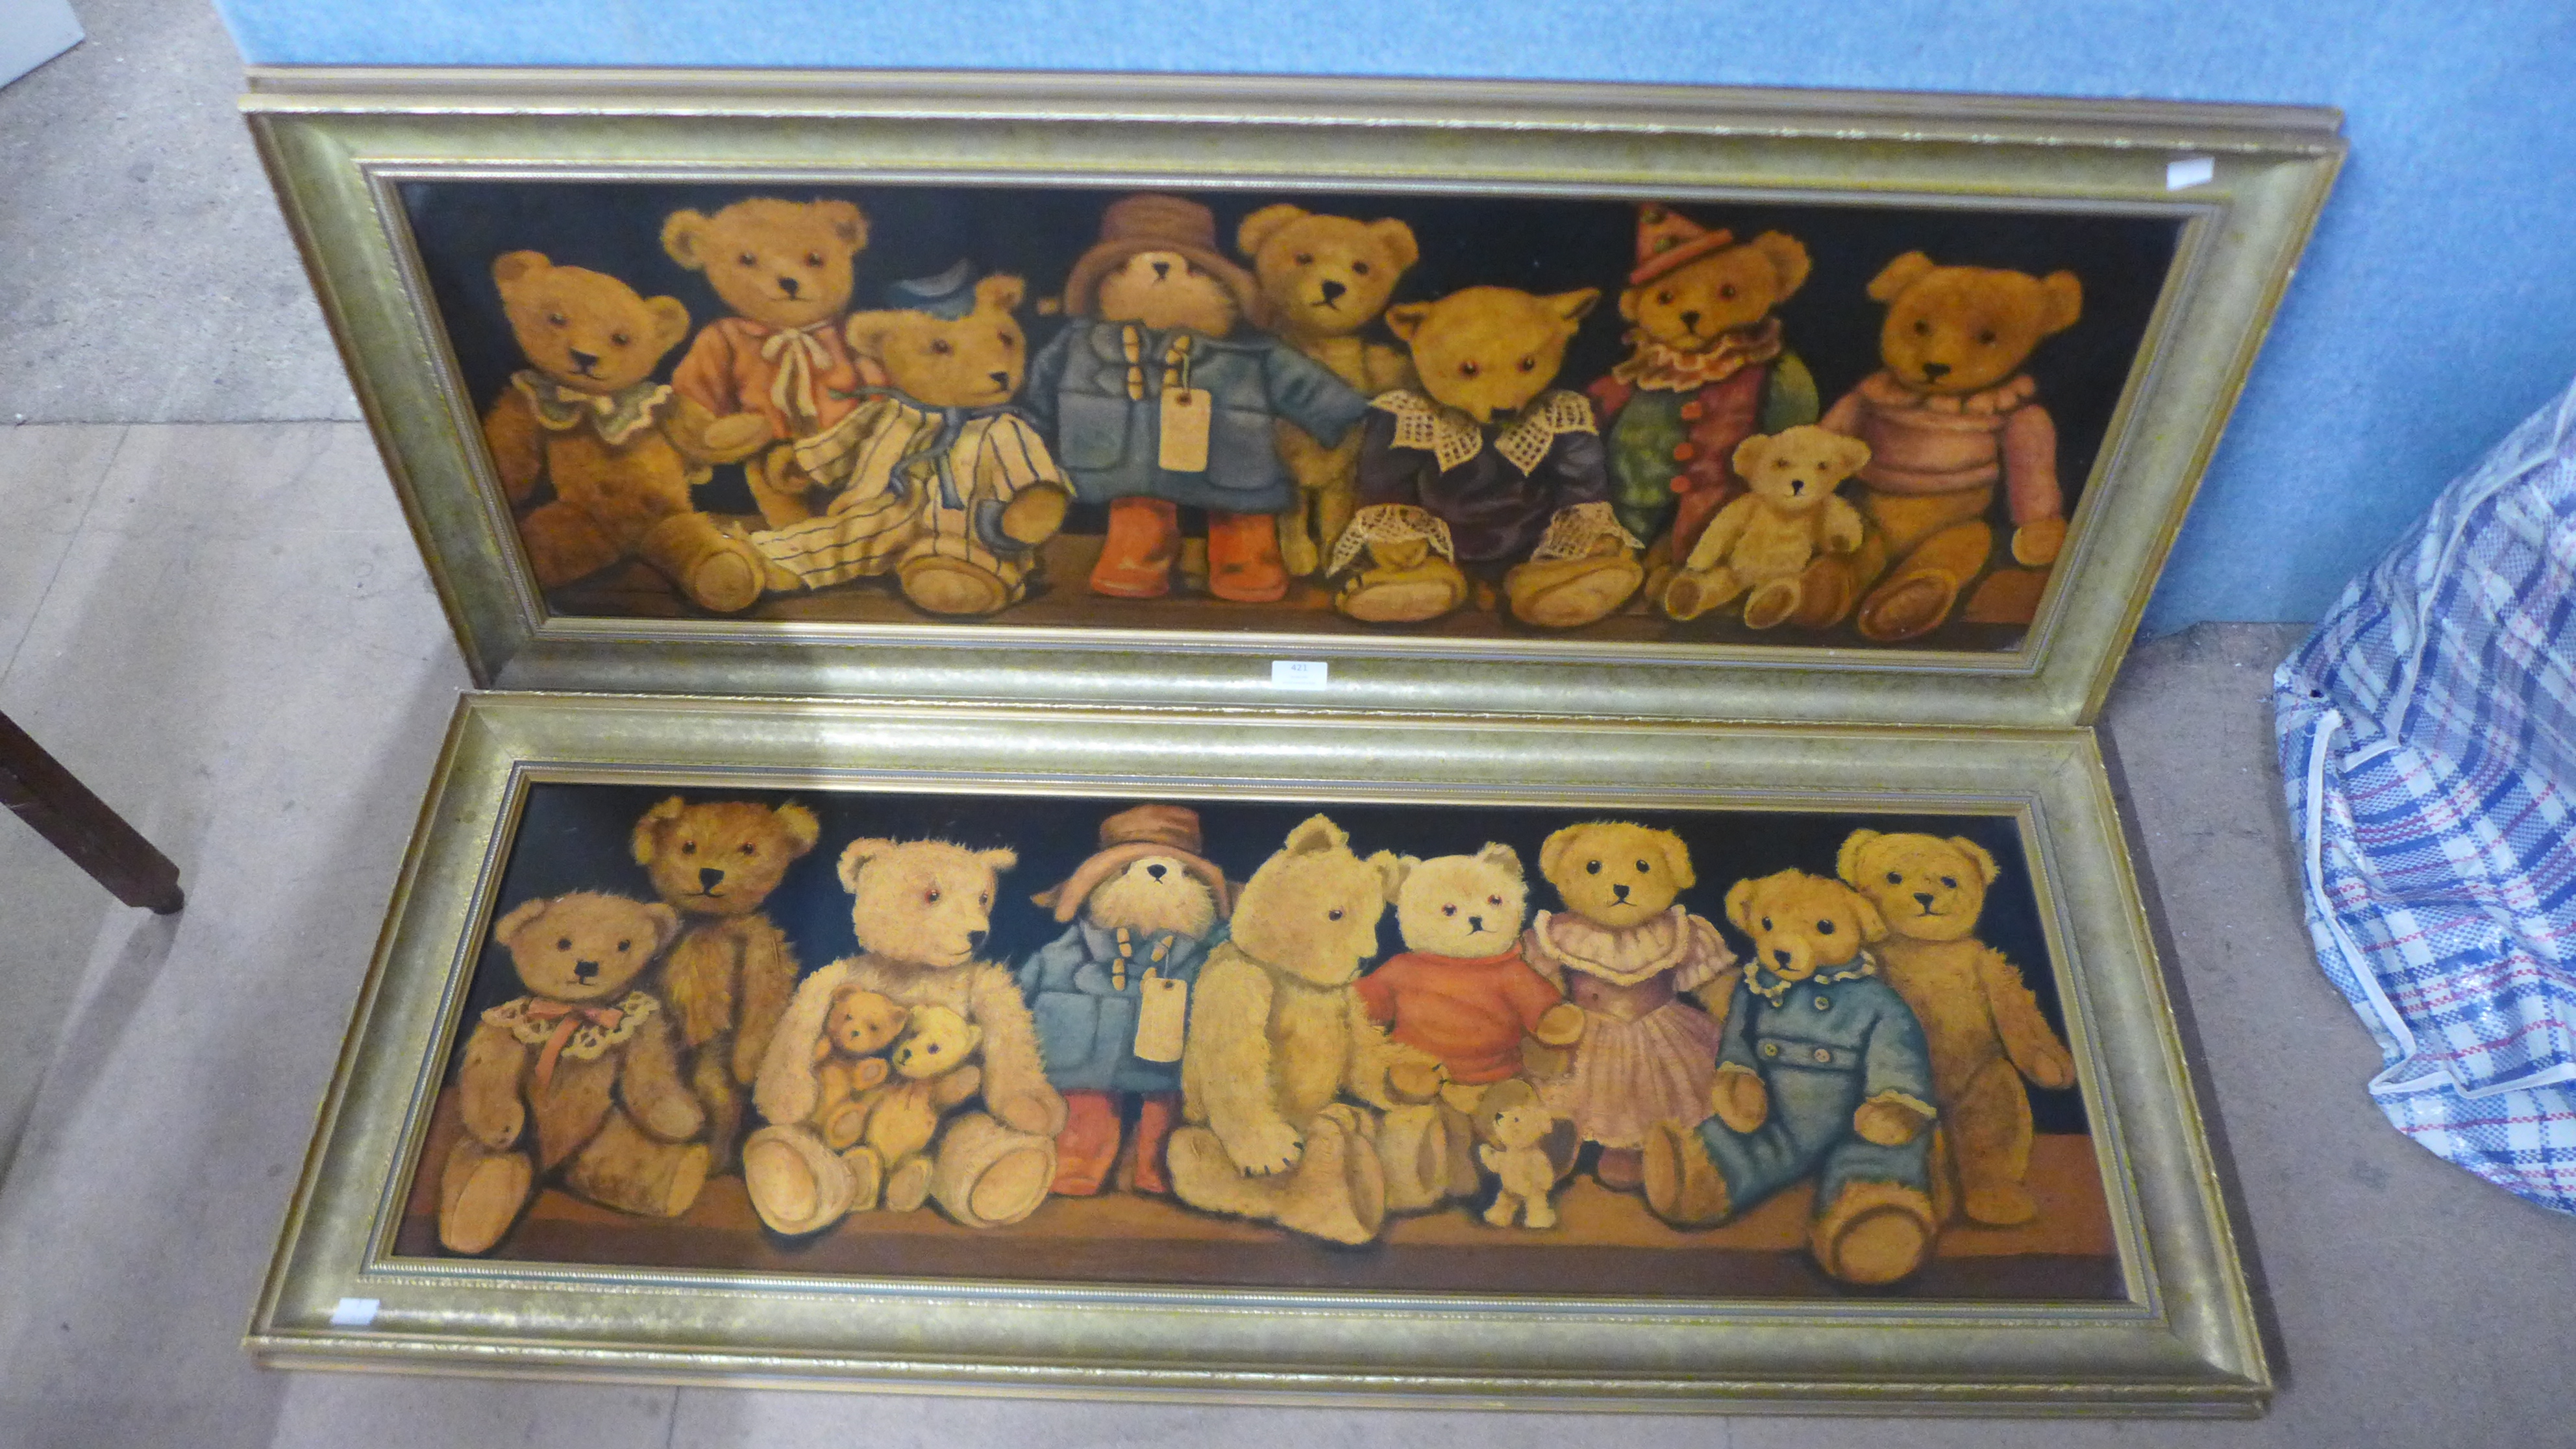 A pair of Teddy bear prints, framed - Image 2 of 2